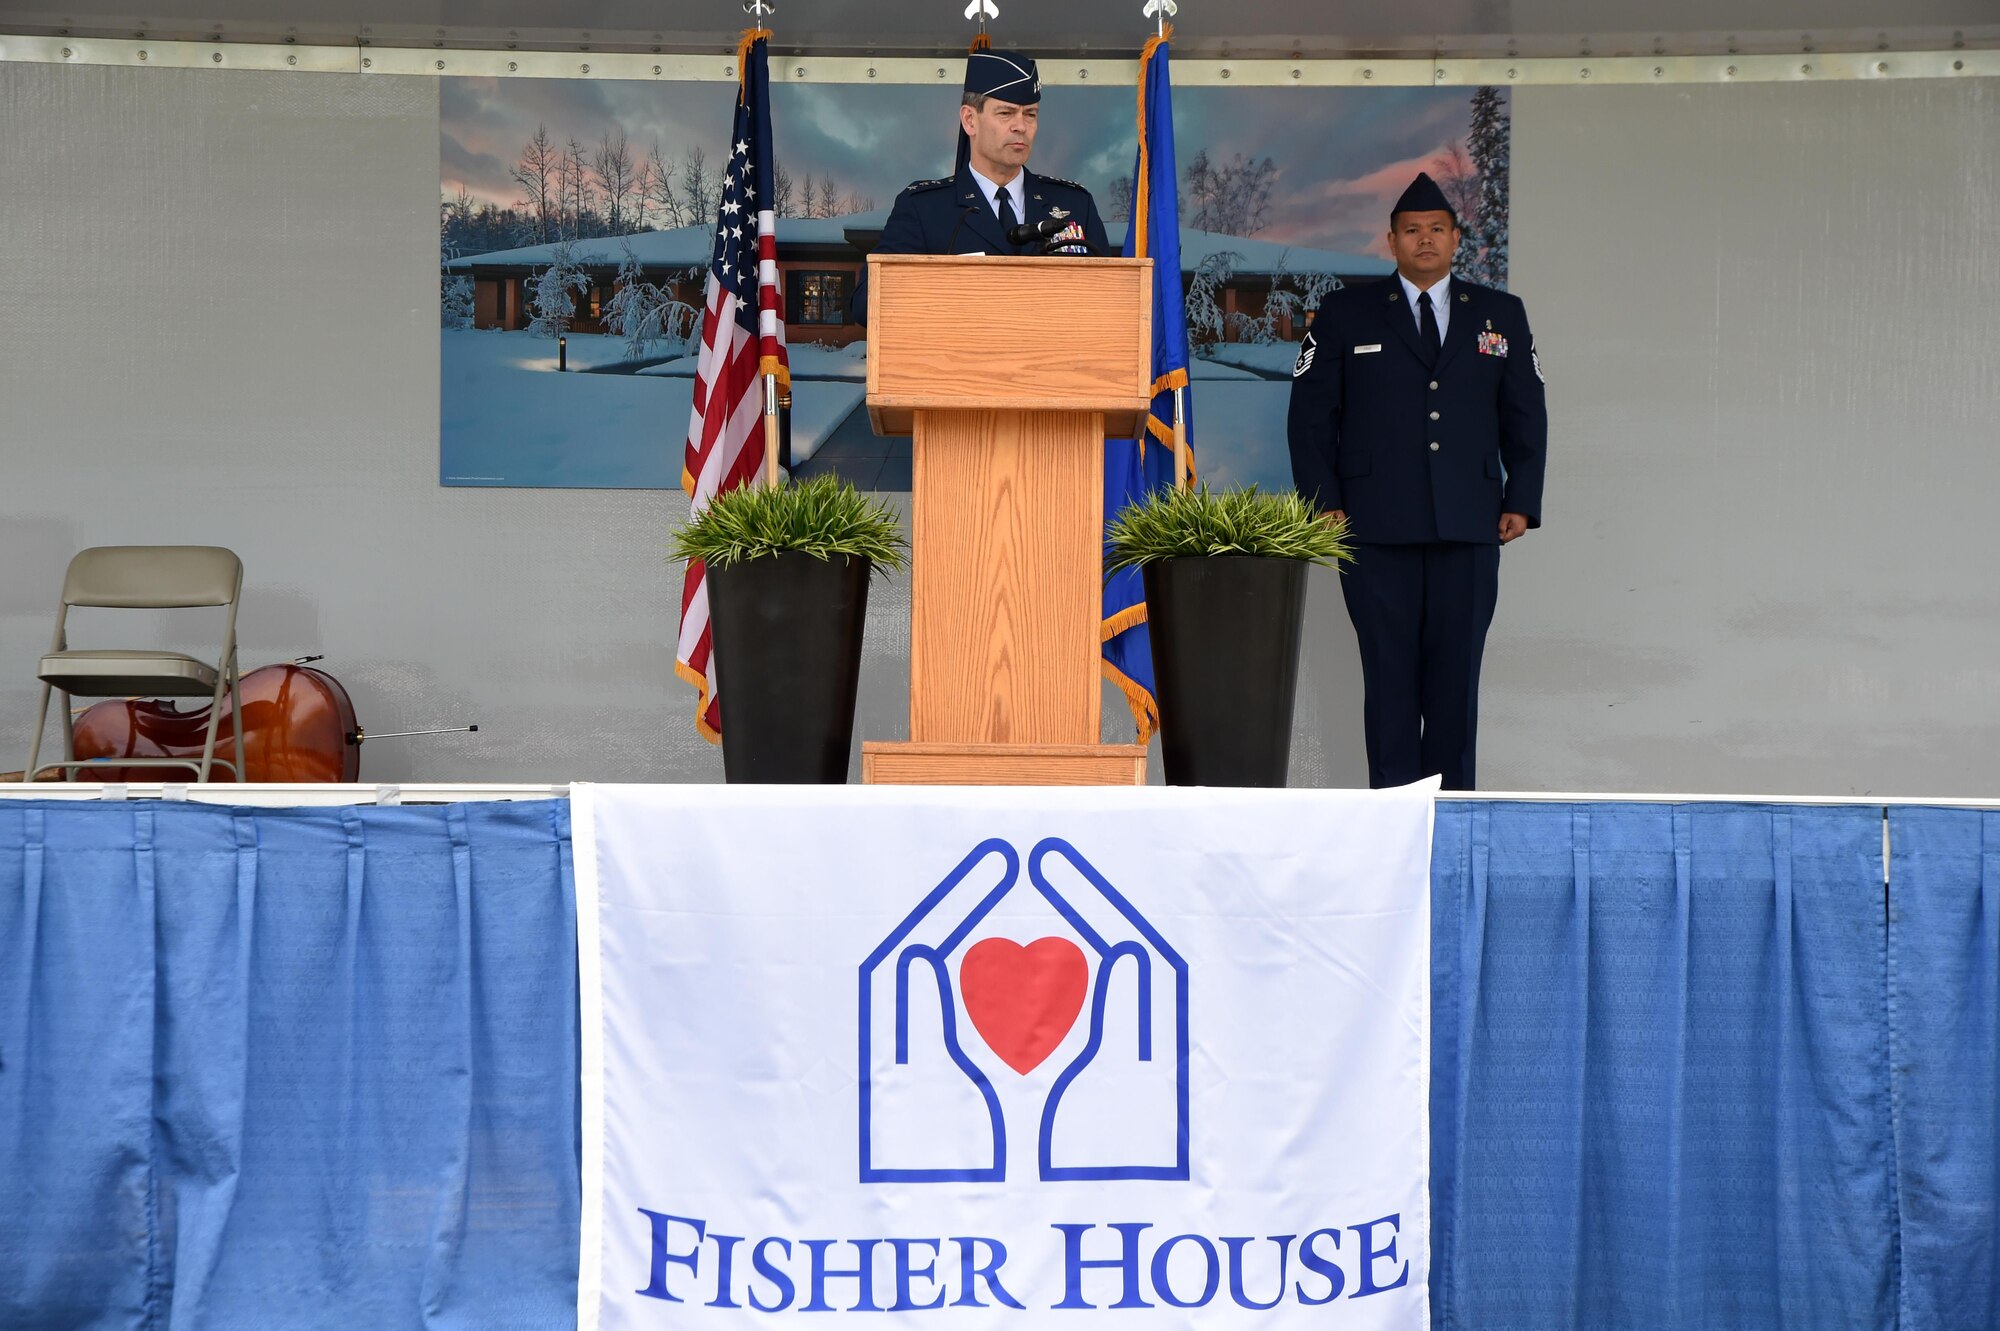 Air Force Lt. Gen. Ken Wilsbach, Alaskan North American Aerospace Defense Command Region, Alaskan Command and Eleventh Air Force commander, speaks during the groundbreaking ceremony, June 6, 2017 at Joint Base Elmendorf-Richardson, Alaska. The new additional Fisher House facility will have 16 units and can accommodate 28 families once finished. (U.S. Air Force photo by Staff Sgt. Sheila deVera)